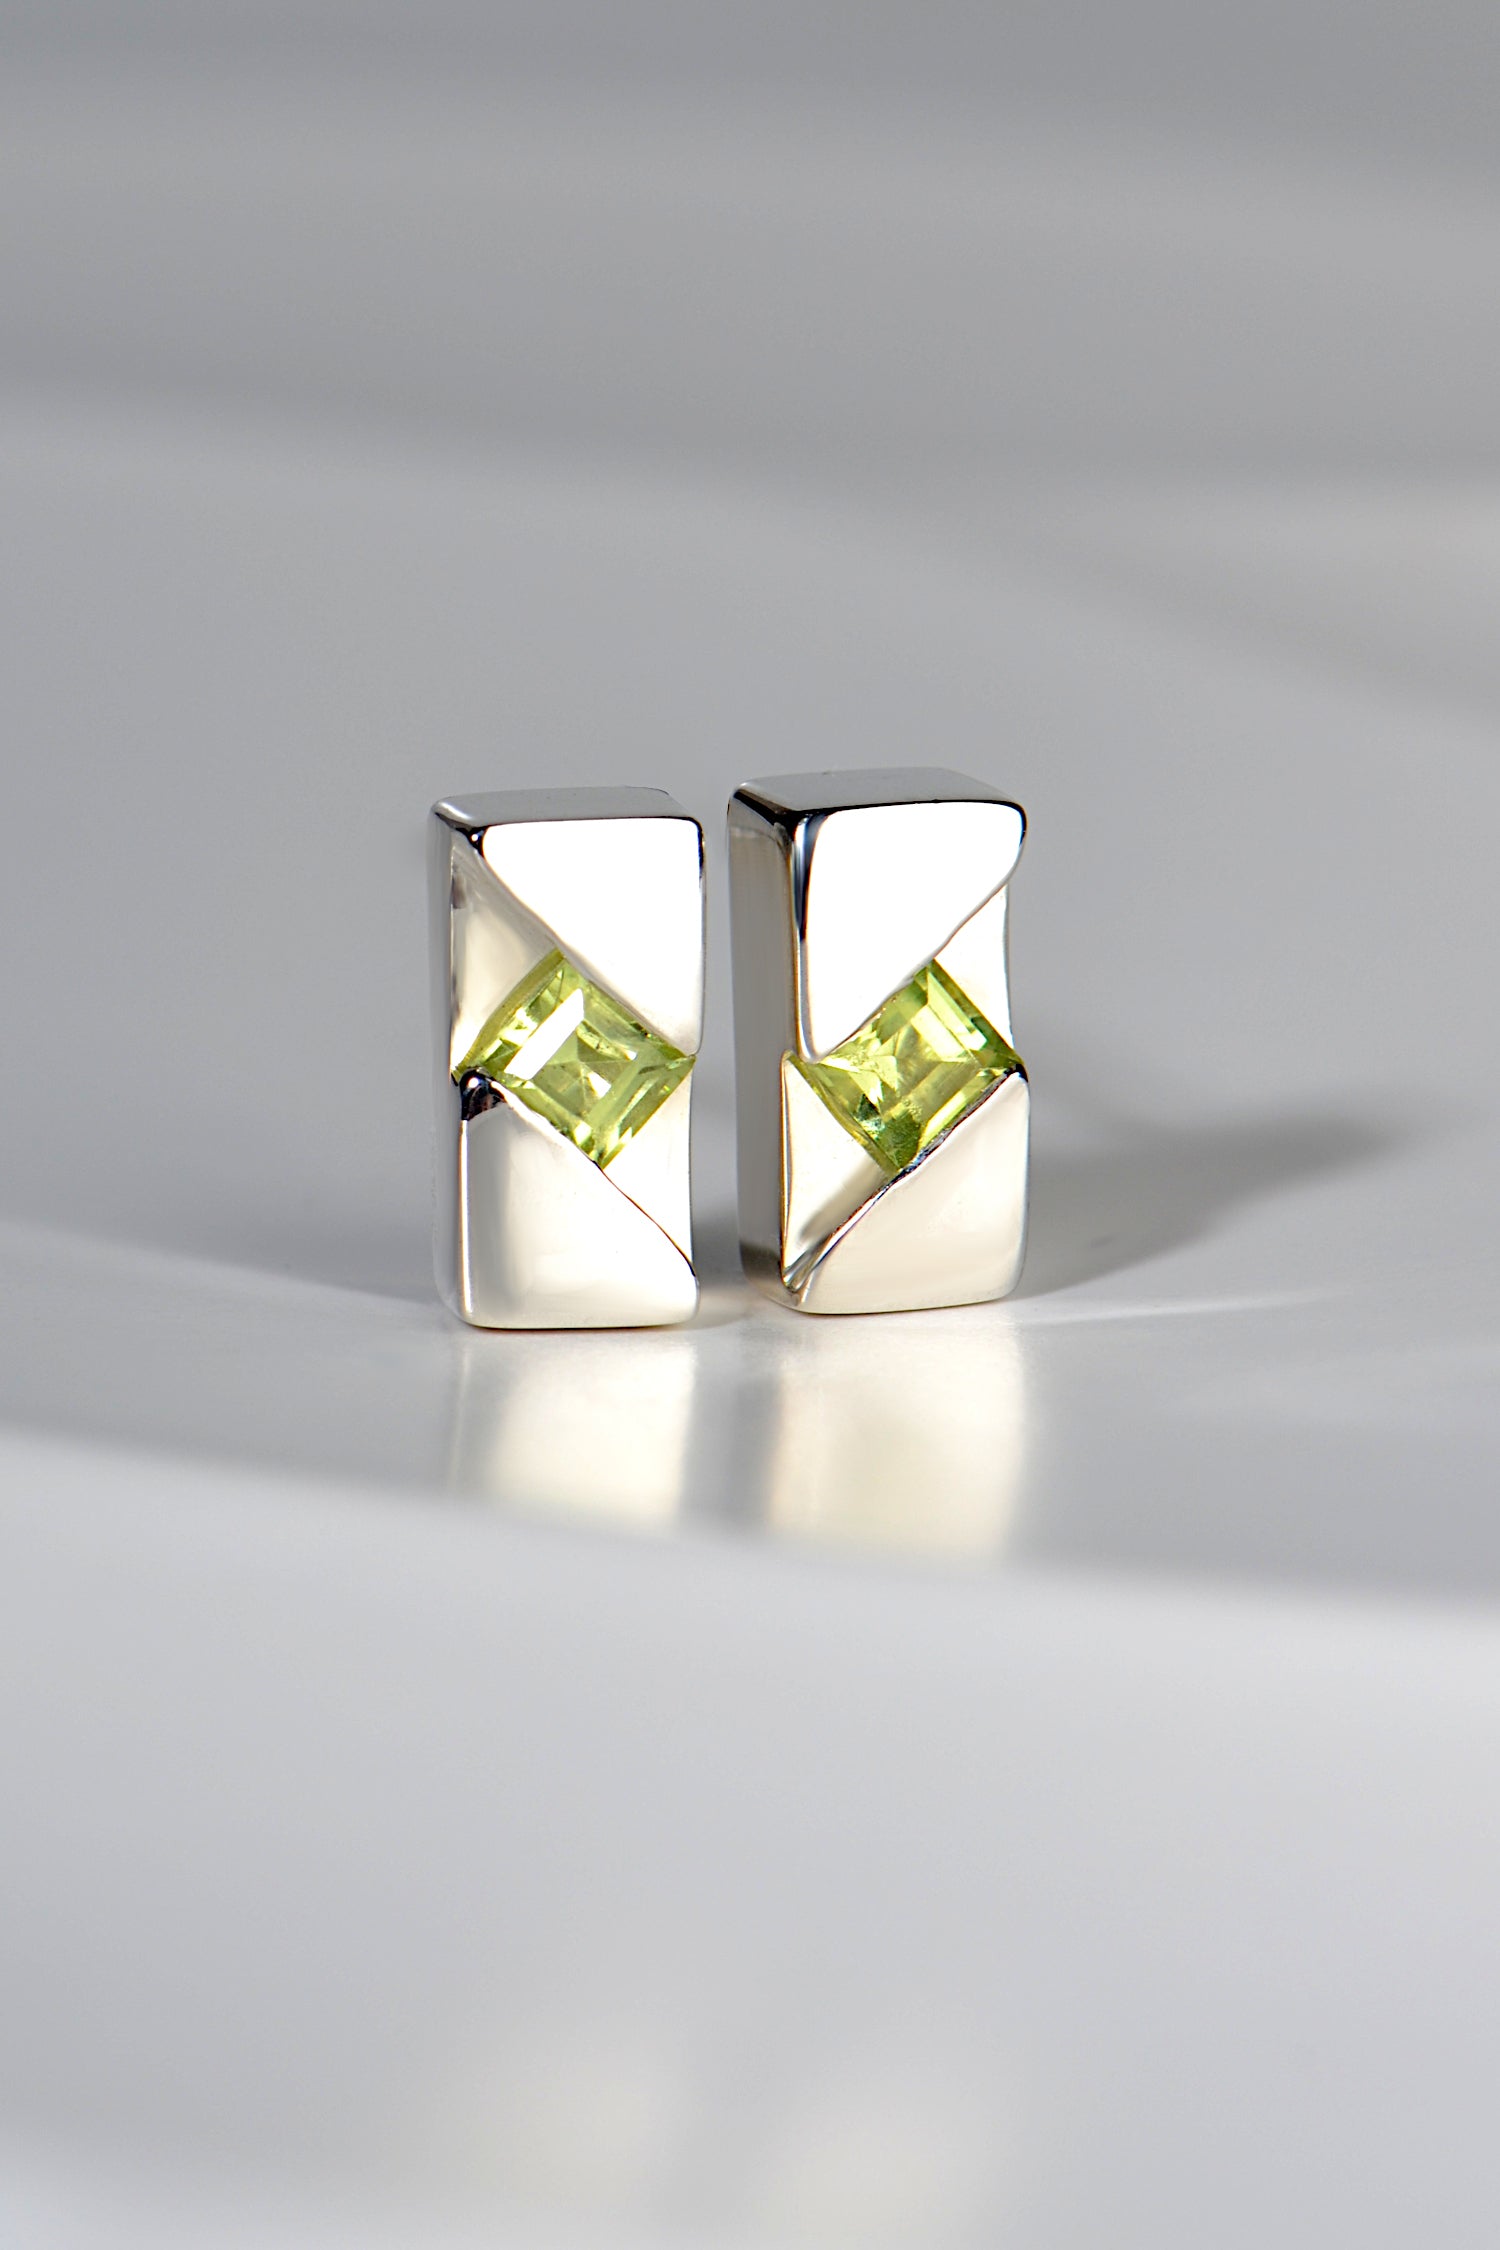 sterling silver earrings handmade and set with a square peridot gemstone